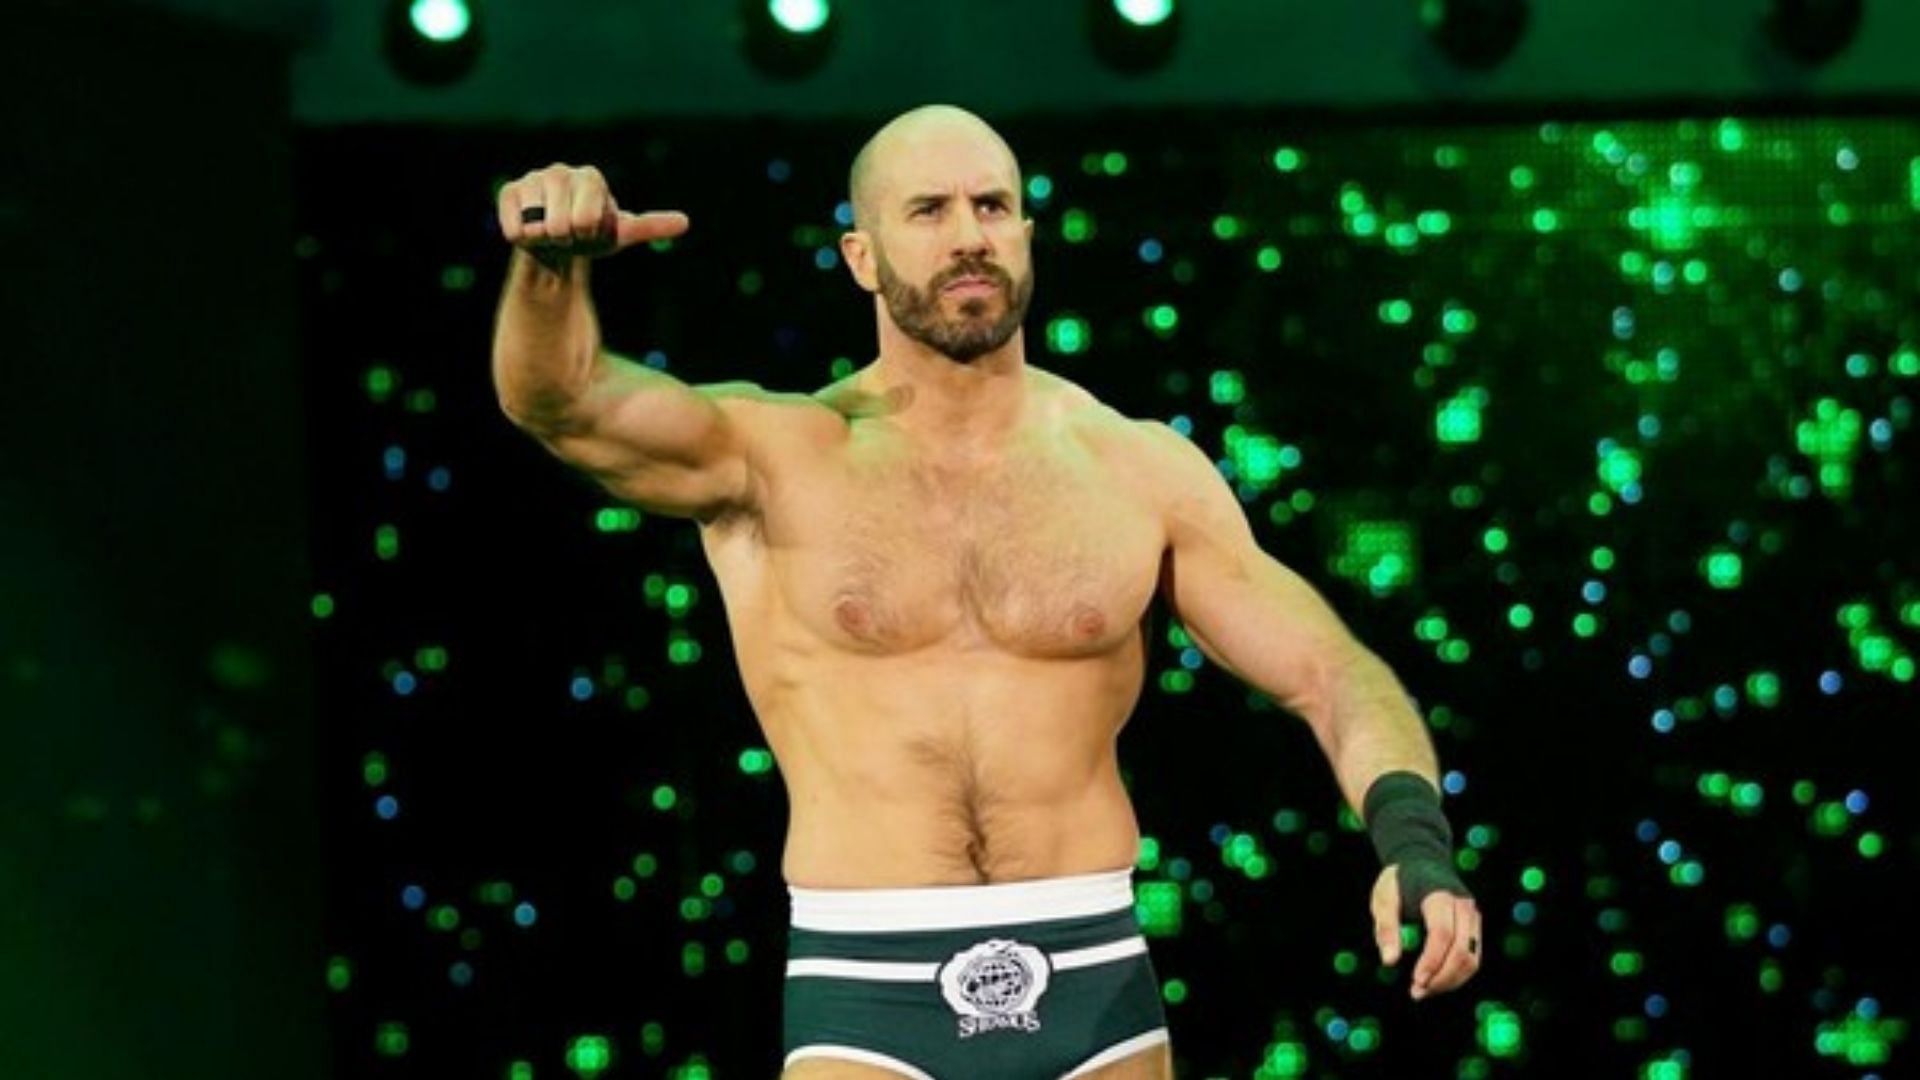 The Swiss Superman remains a free agent following his WWE departure